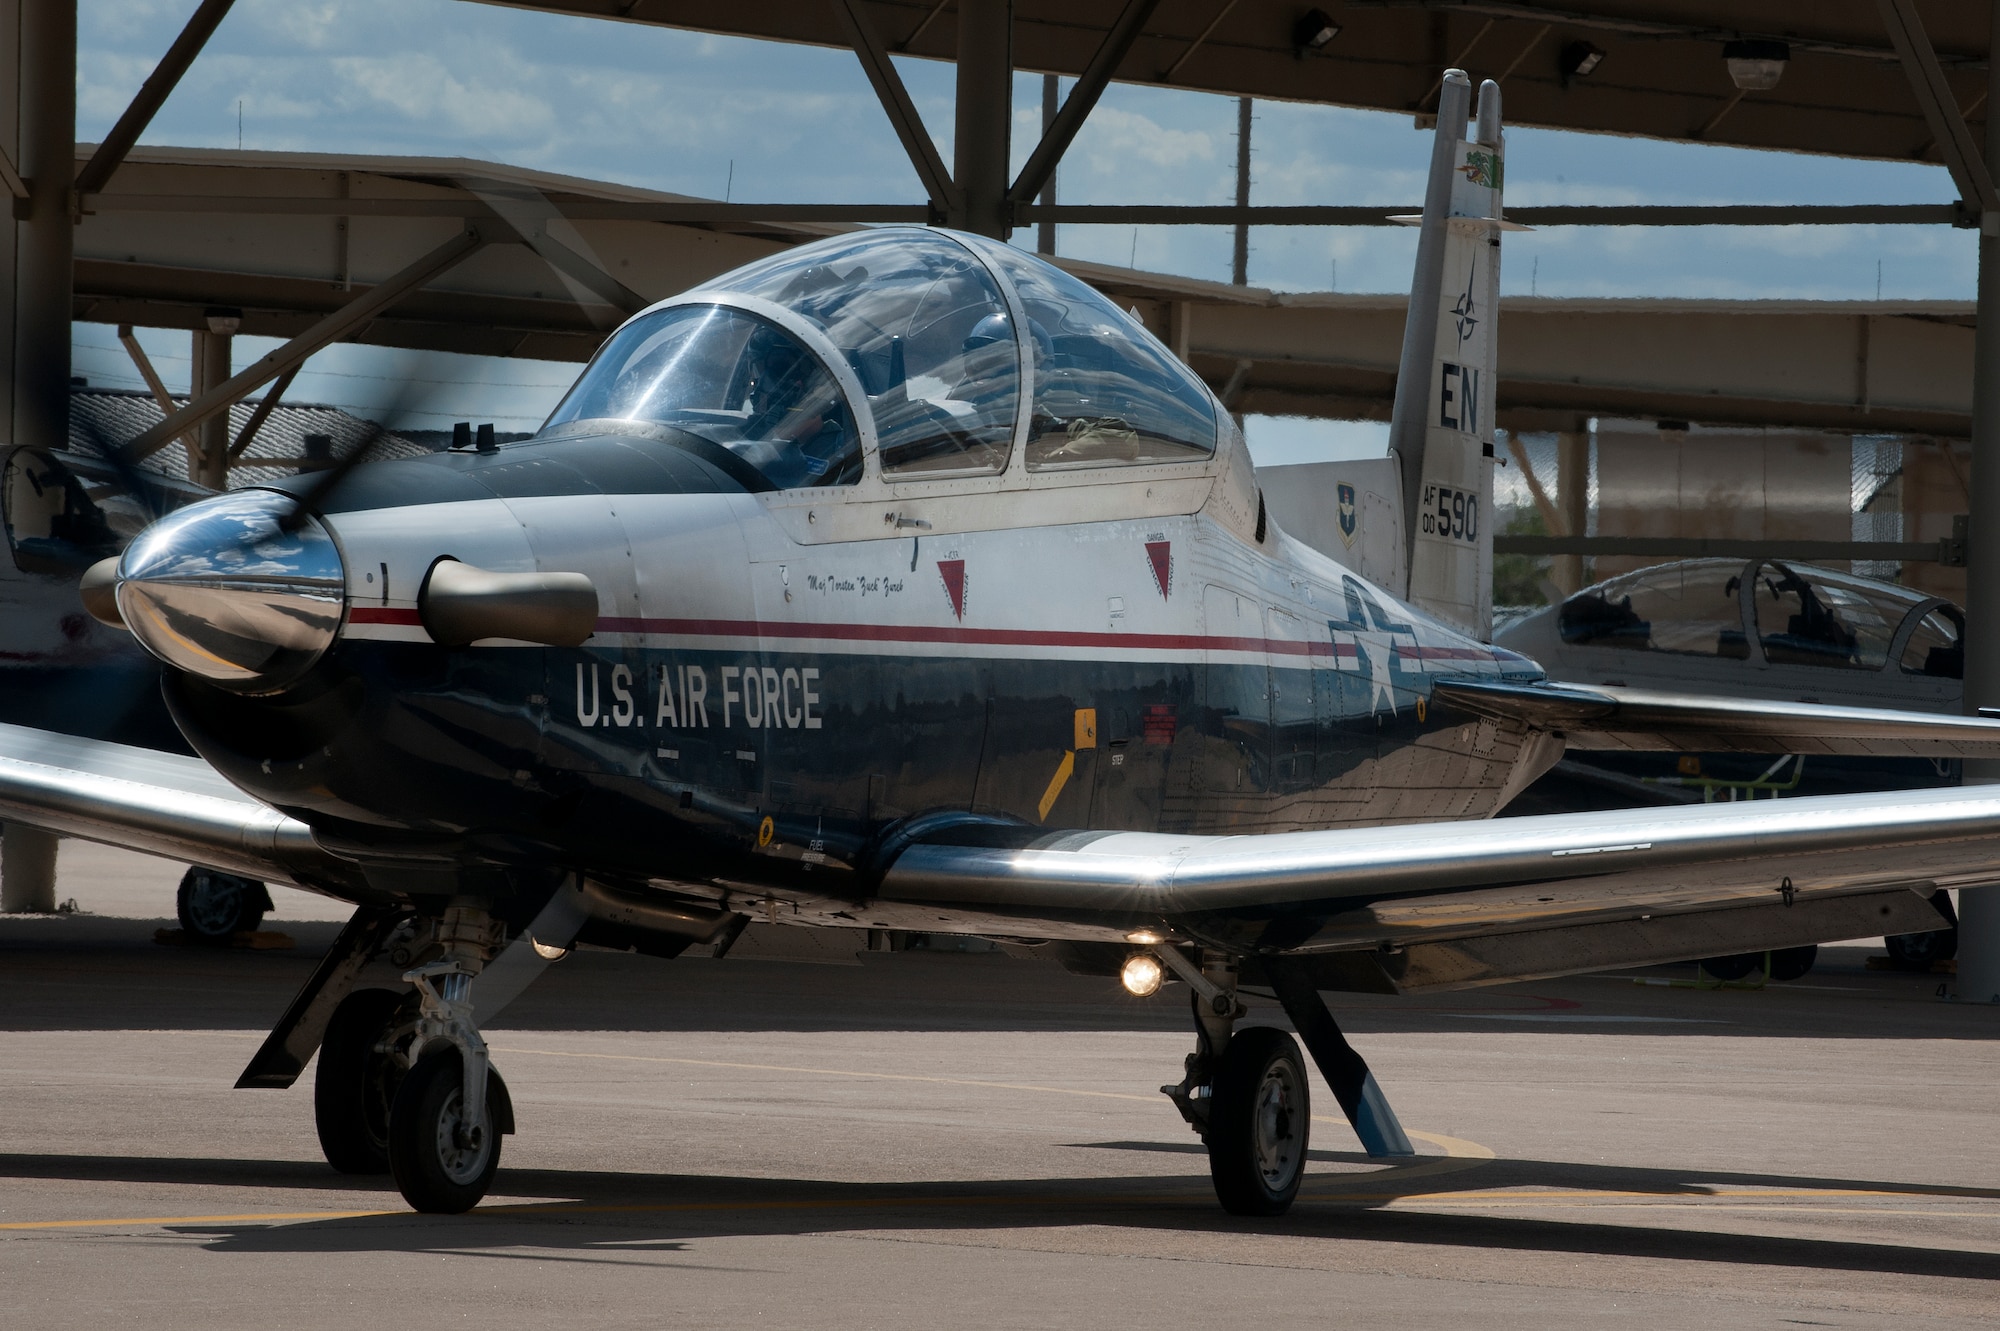 The T-6A Texan II is a single-engine, two-seat primary trainer designed to train Joint Primary Pilot Training, or JPPT, students in basic flying skills common to U.S. Air Force and Navy pilots. 
